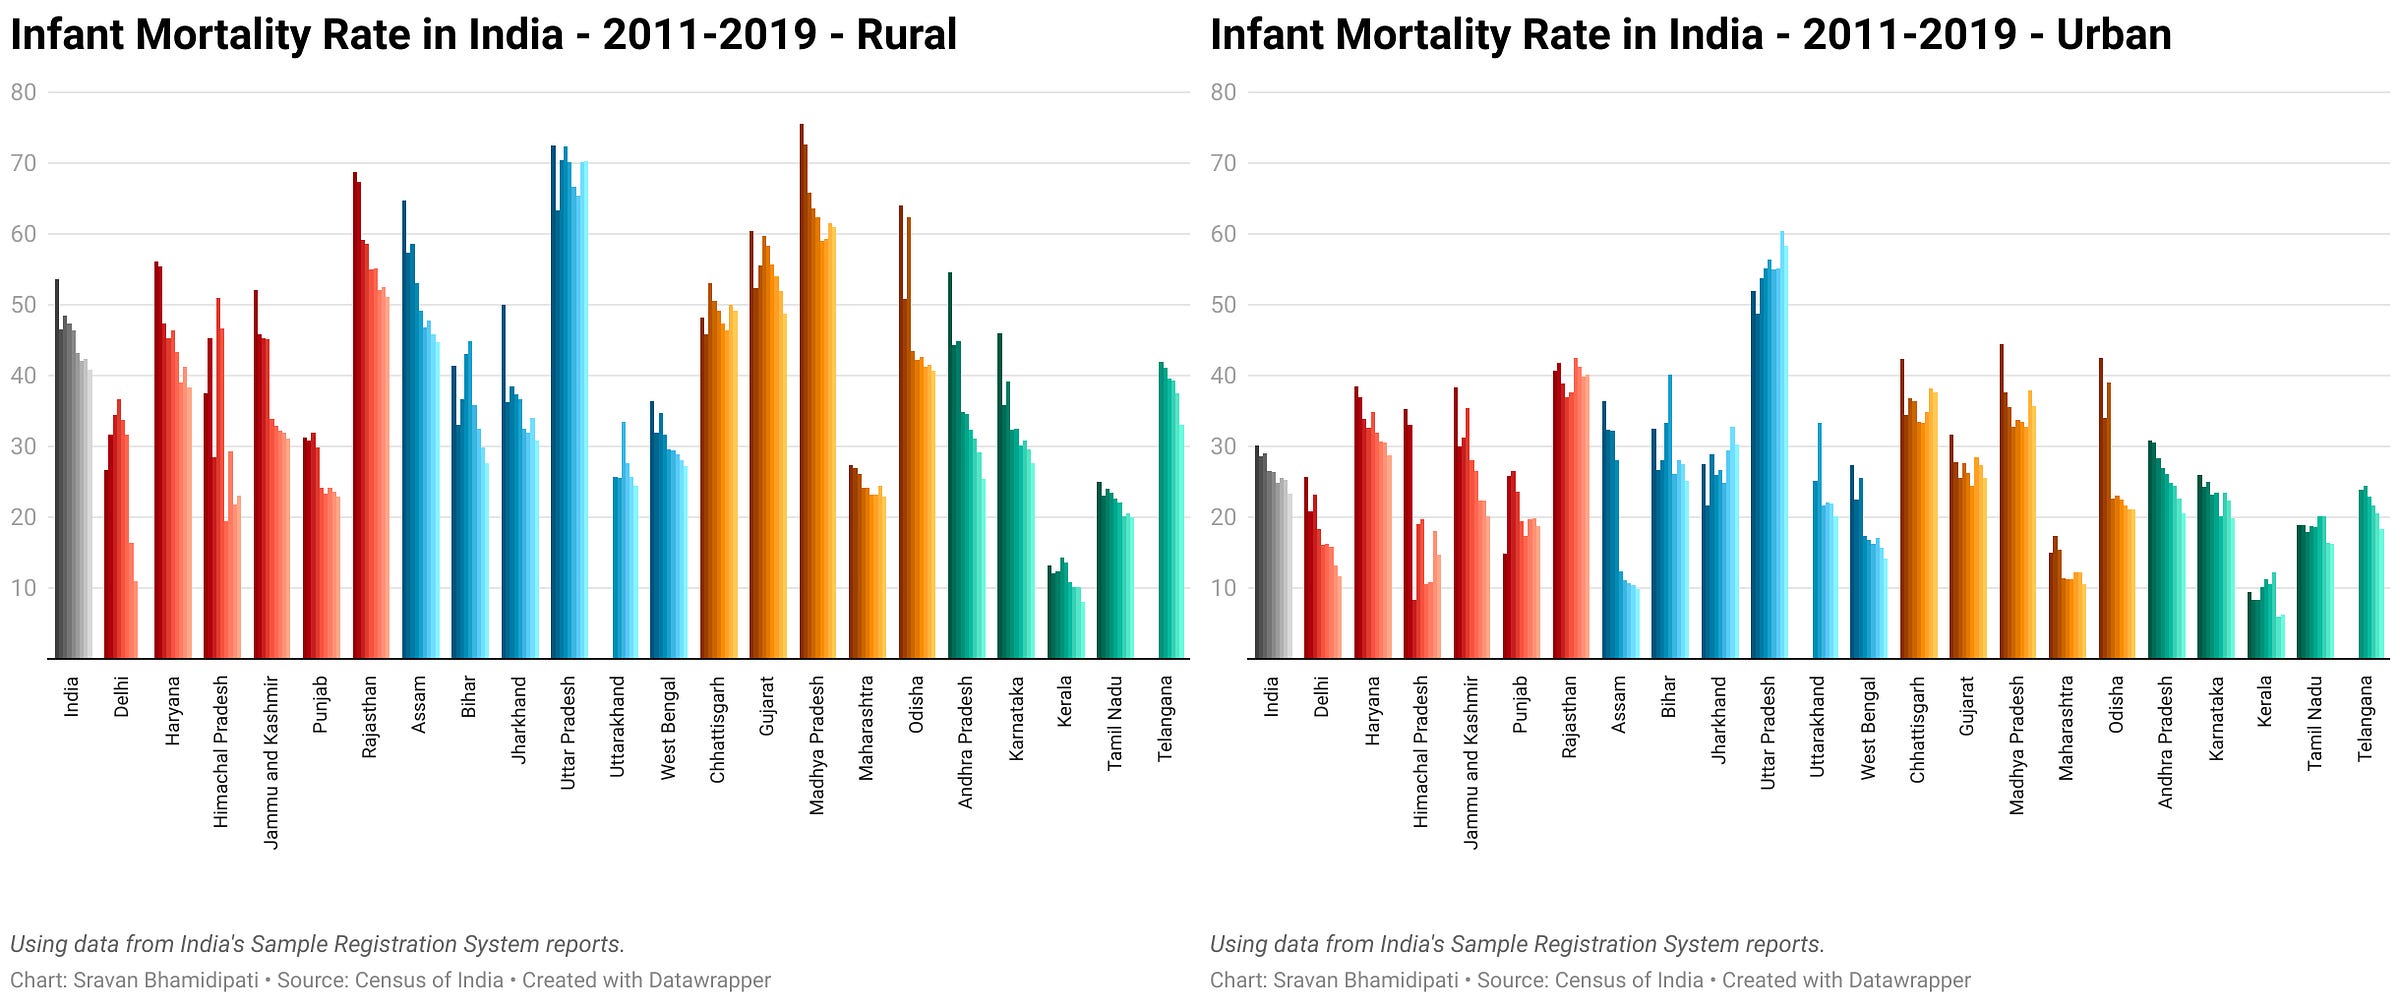 Statewise rural vs urban breakdown of infant mortality rates in India, from 2007 to 2019